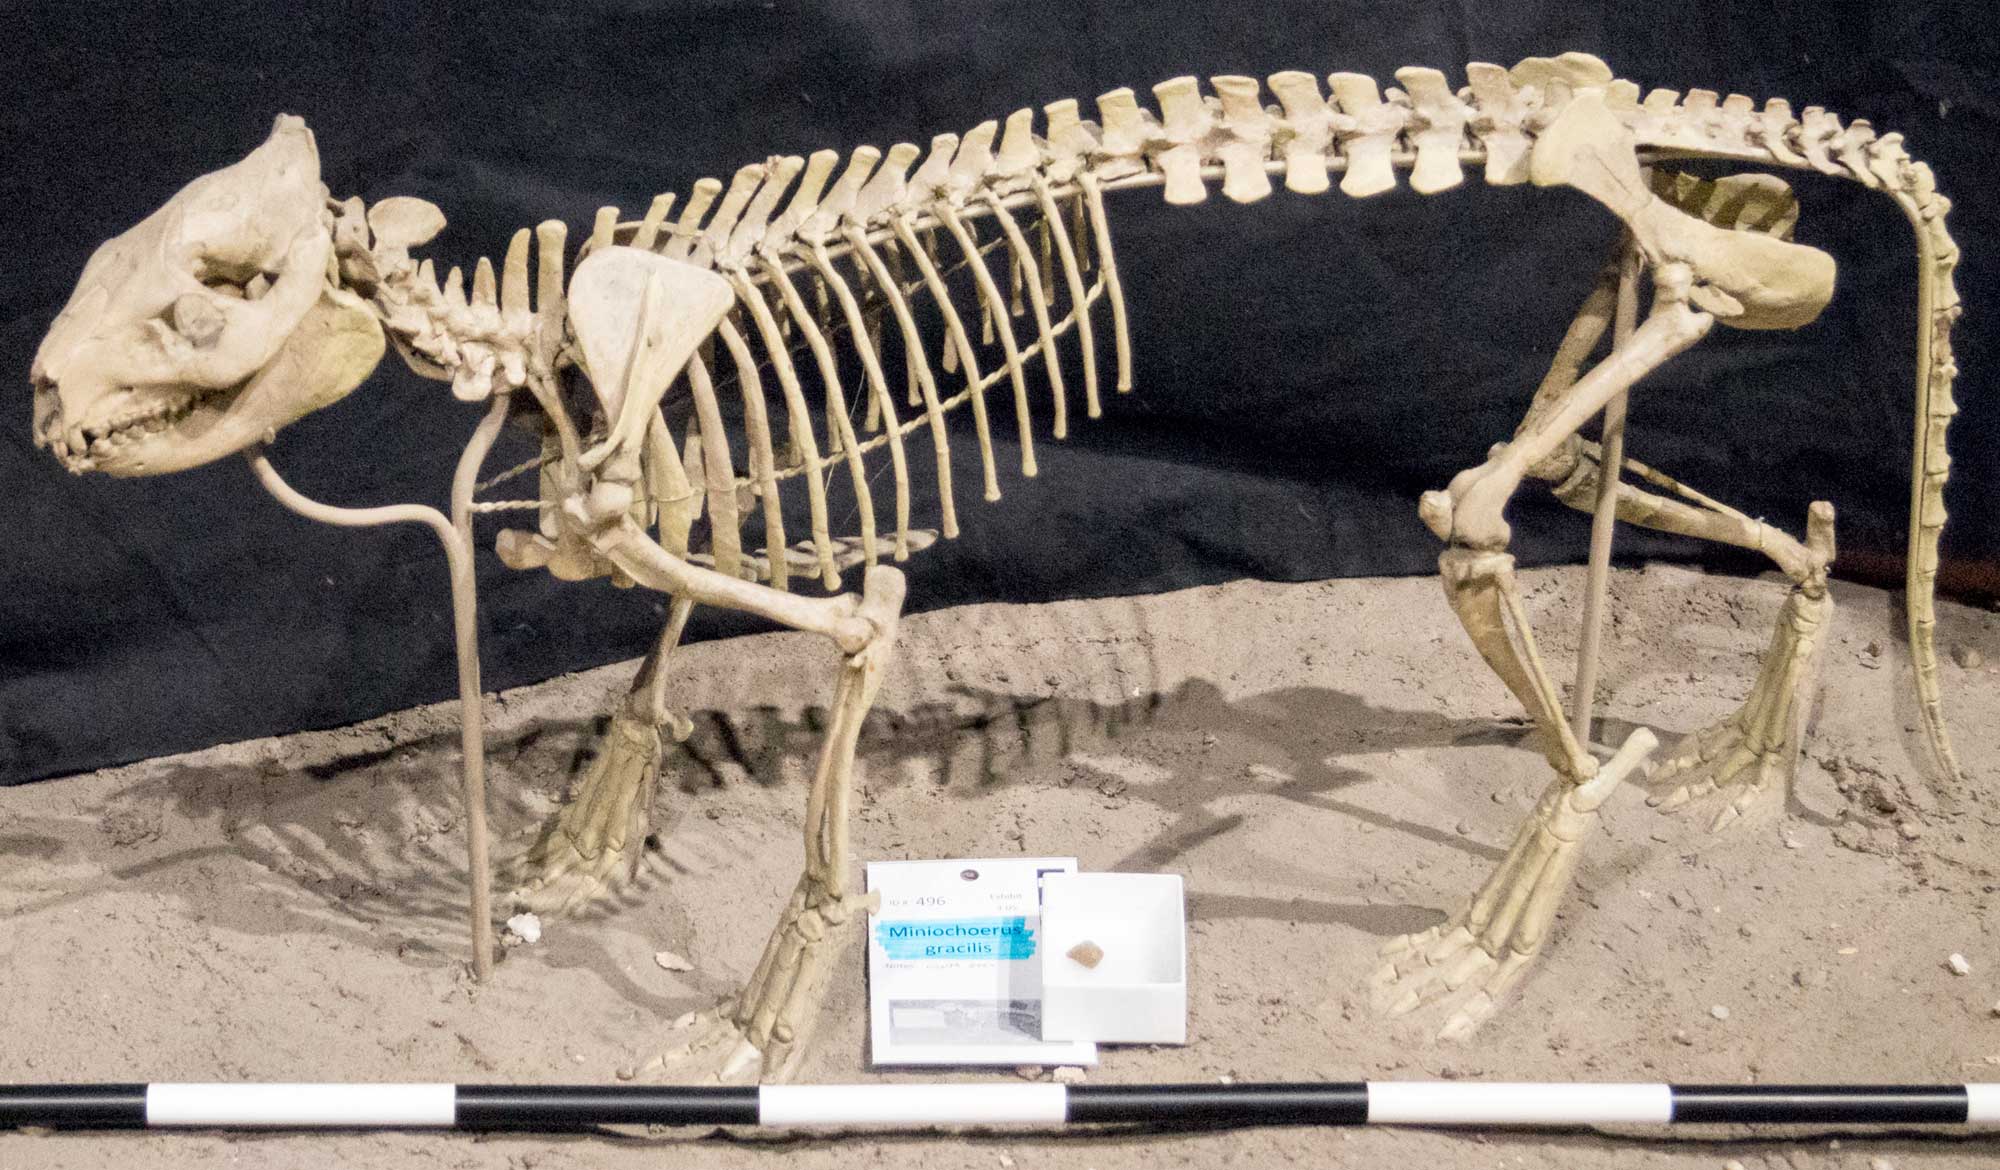 Photograph of a skeleton of an oreodont from the Oligocene White River Group of Nebraska. The photograph shows a mounted skeleton in side view, with head pointed left. The animal is standing on four legs, with a long tail drooping toward but not touching the ground. The skull is robust with smallish teeth. The scale bar appears to indicate that the animal is about 65 centimeters long with tail hanging down. 